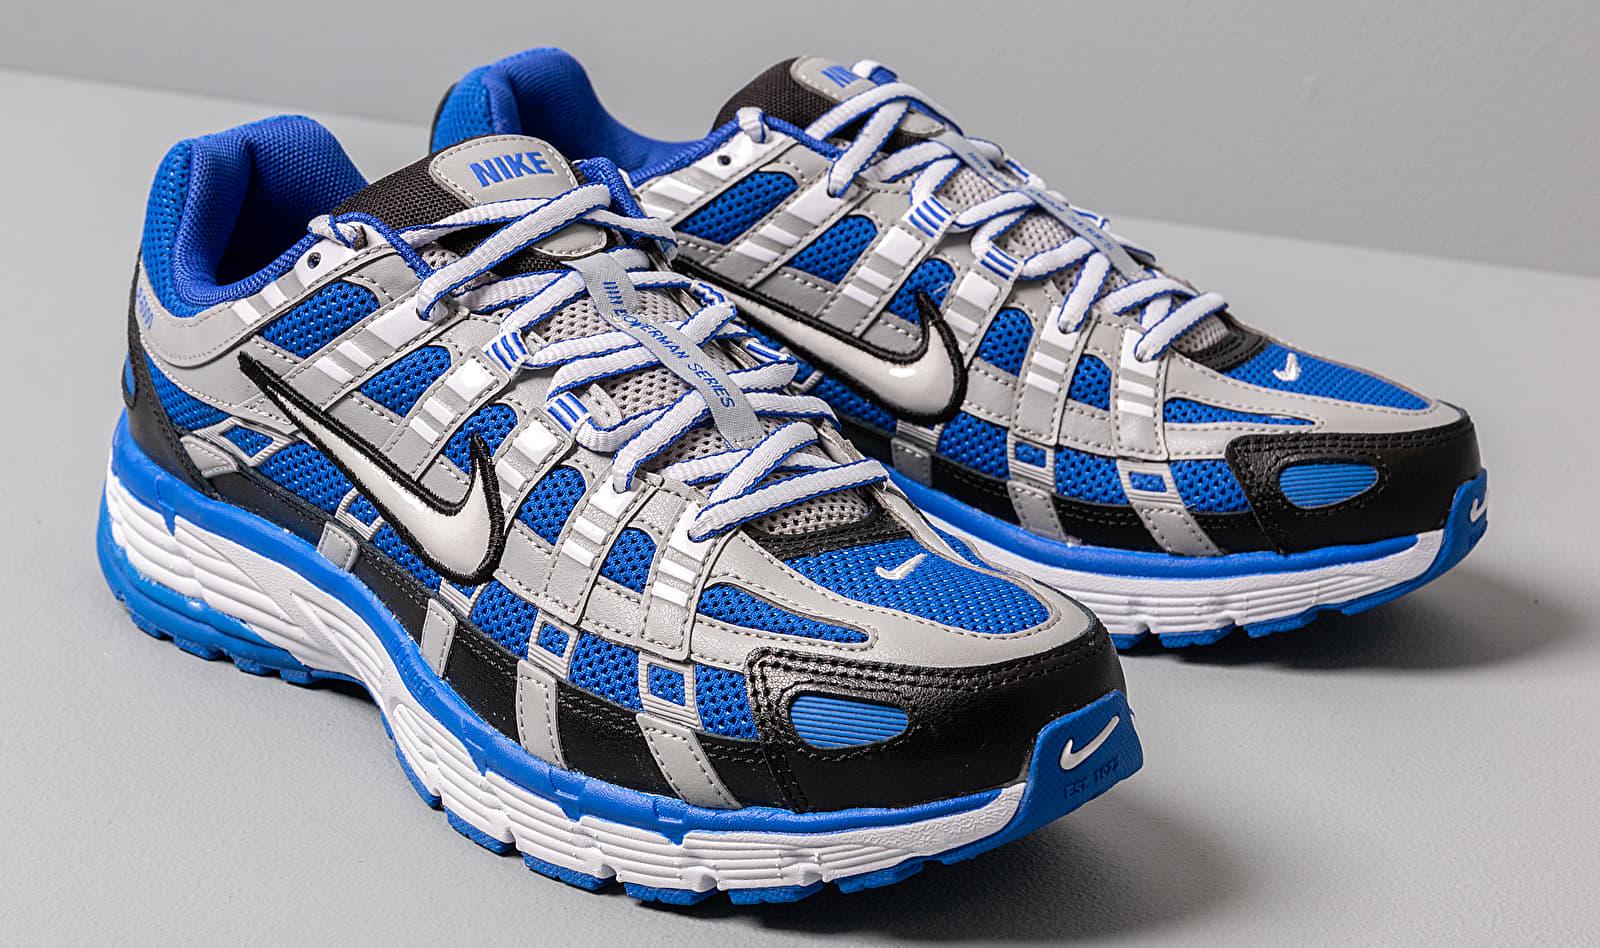 Nike Leather P-6000 in Blue/Black (Blue) for Men | Lyst